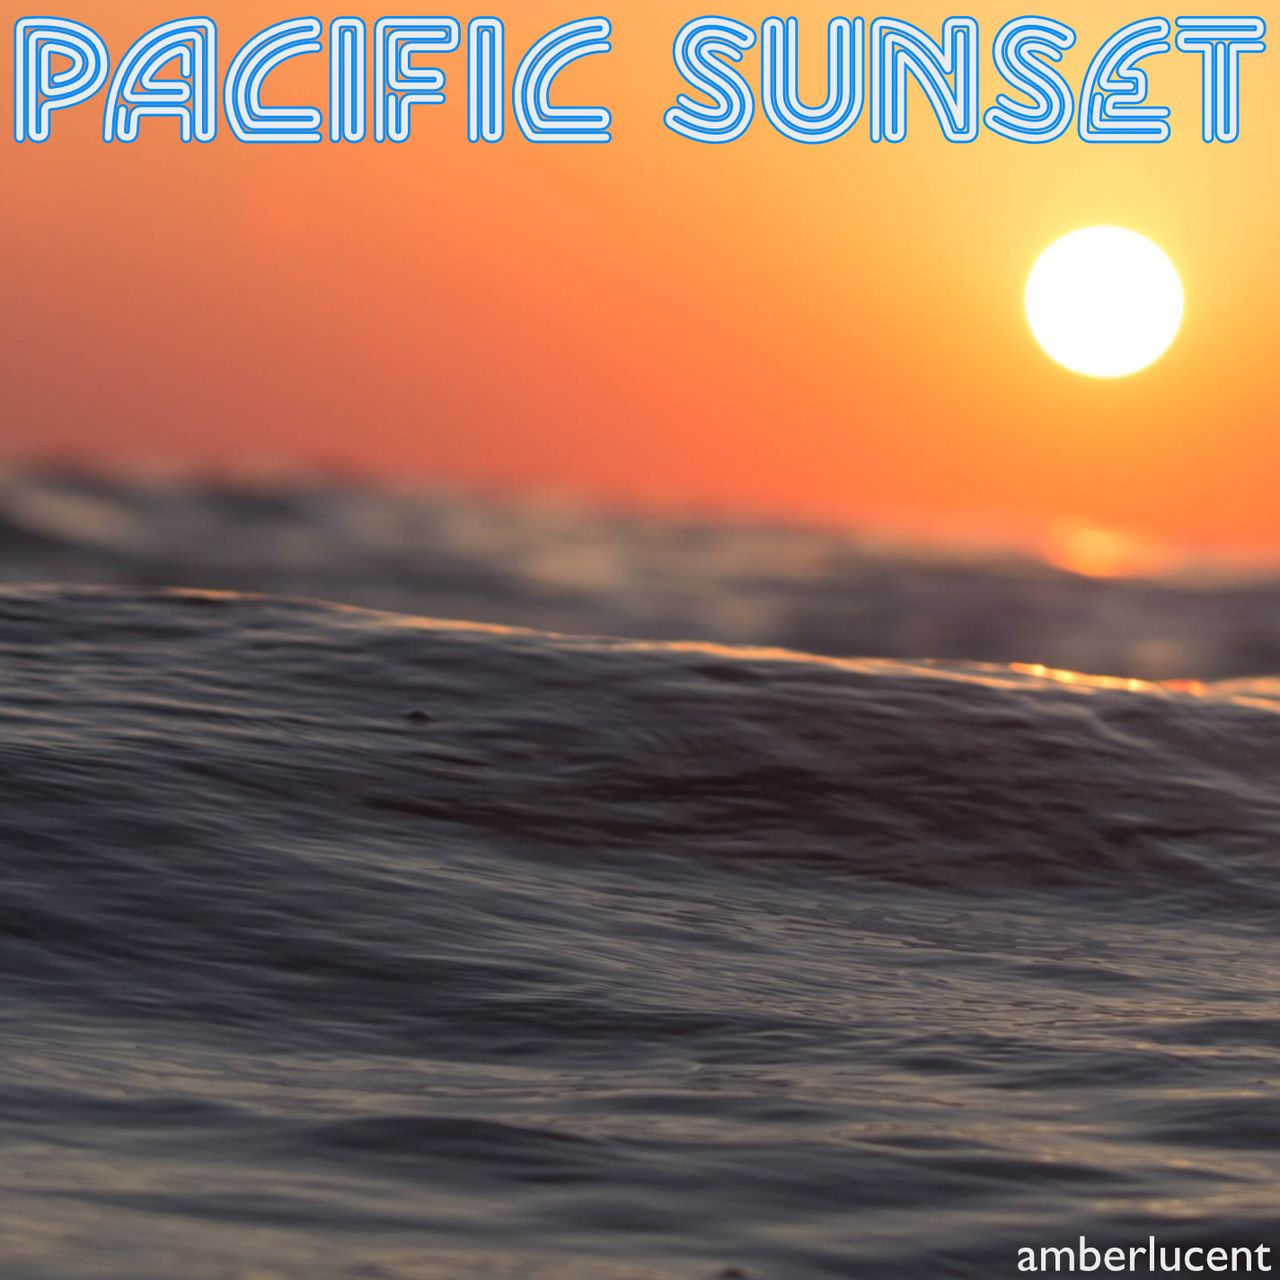 ocean surface the sun and a multi lined stylised classic surf font